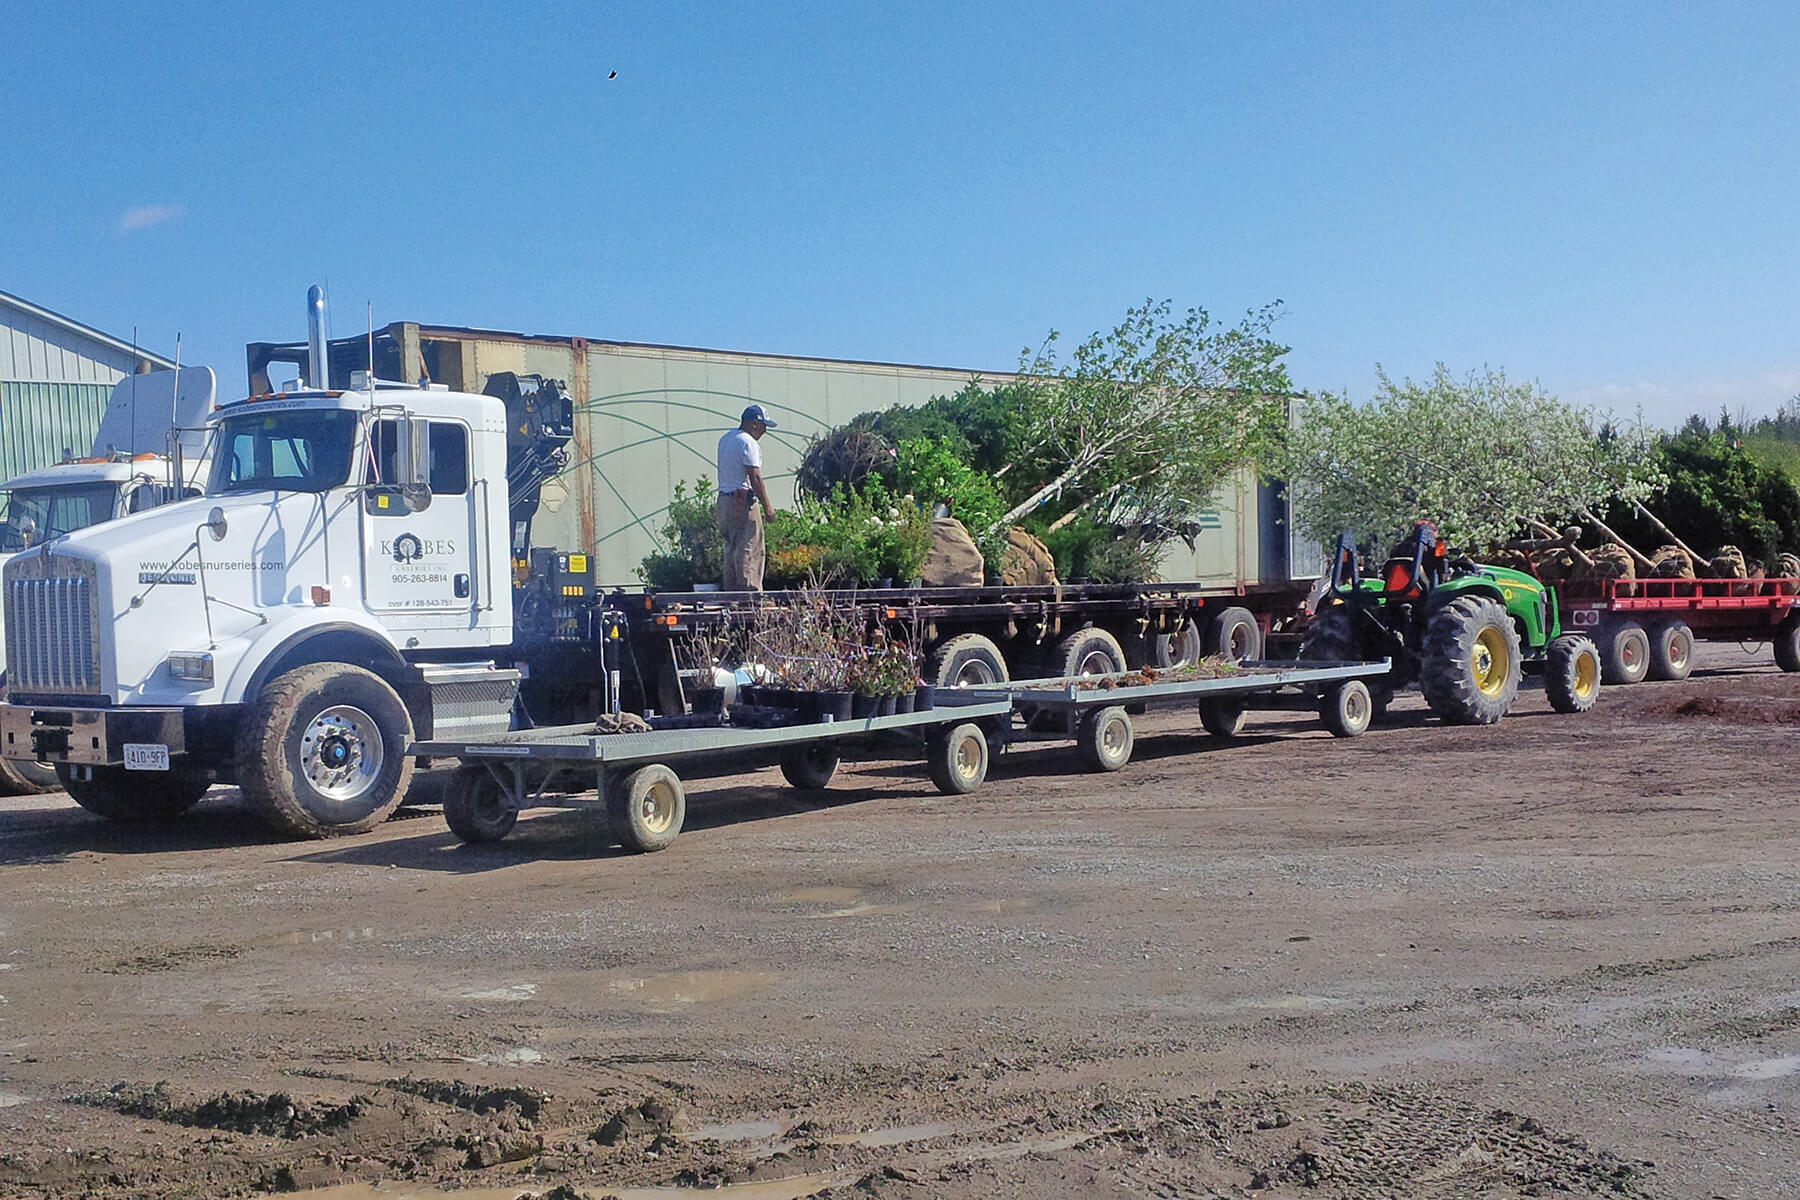 large flatbed truck loaded with trees